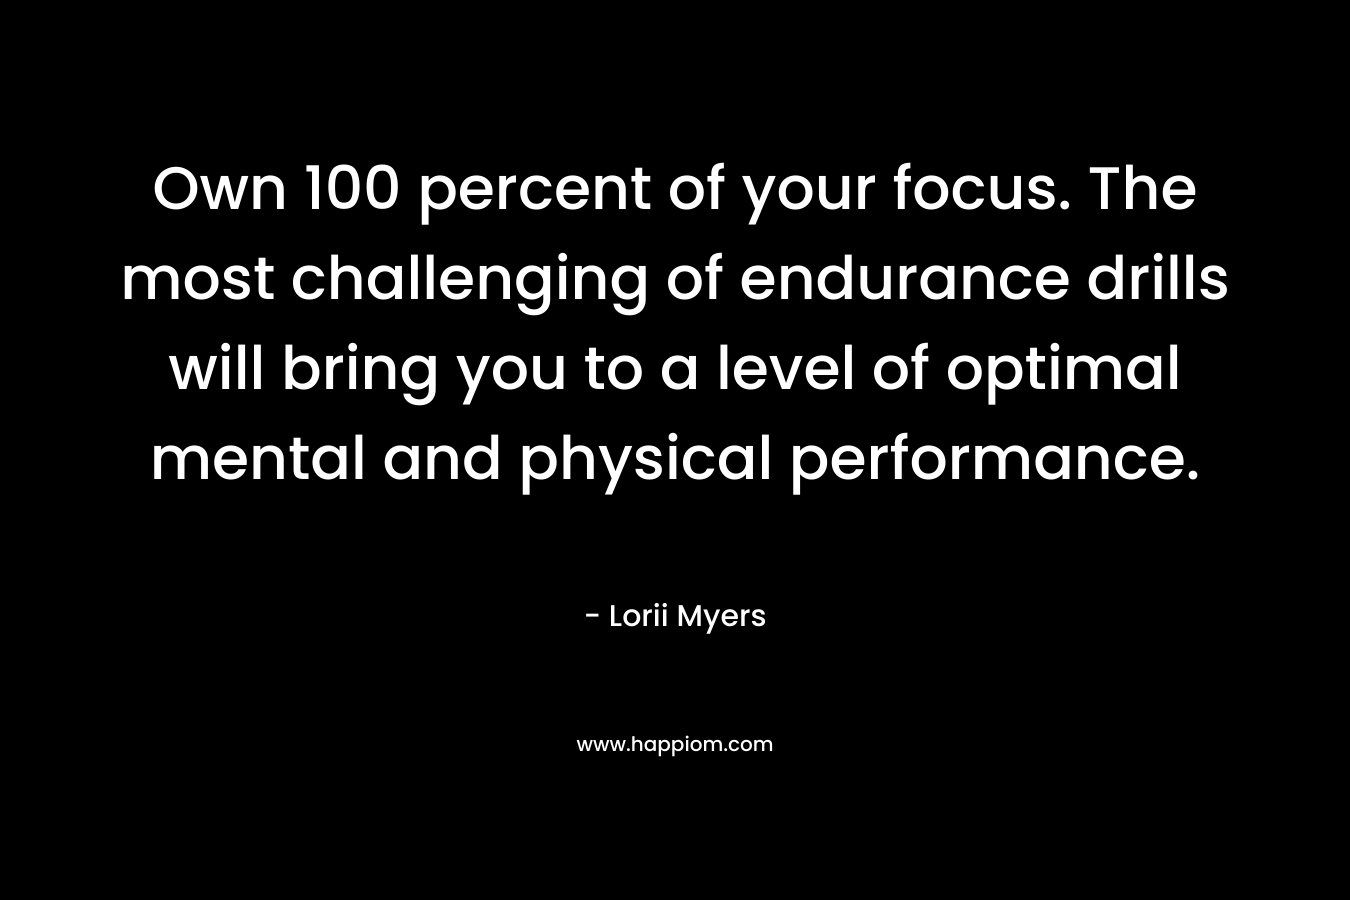 Own 100 percent of your focus. The most challenging of endurance drills will bring you to a level of optimal mental and physical performance.